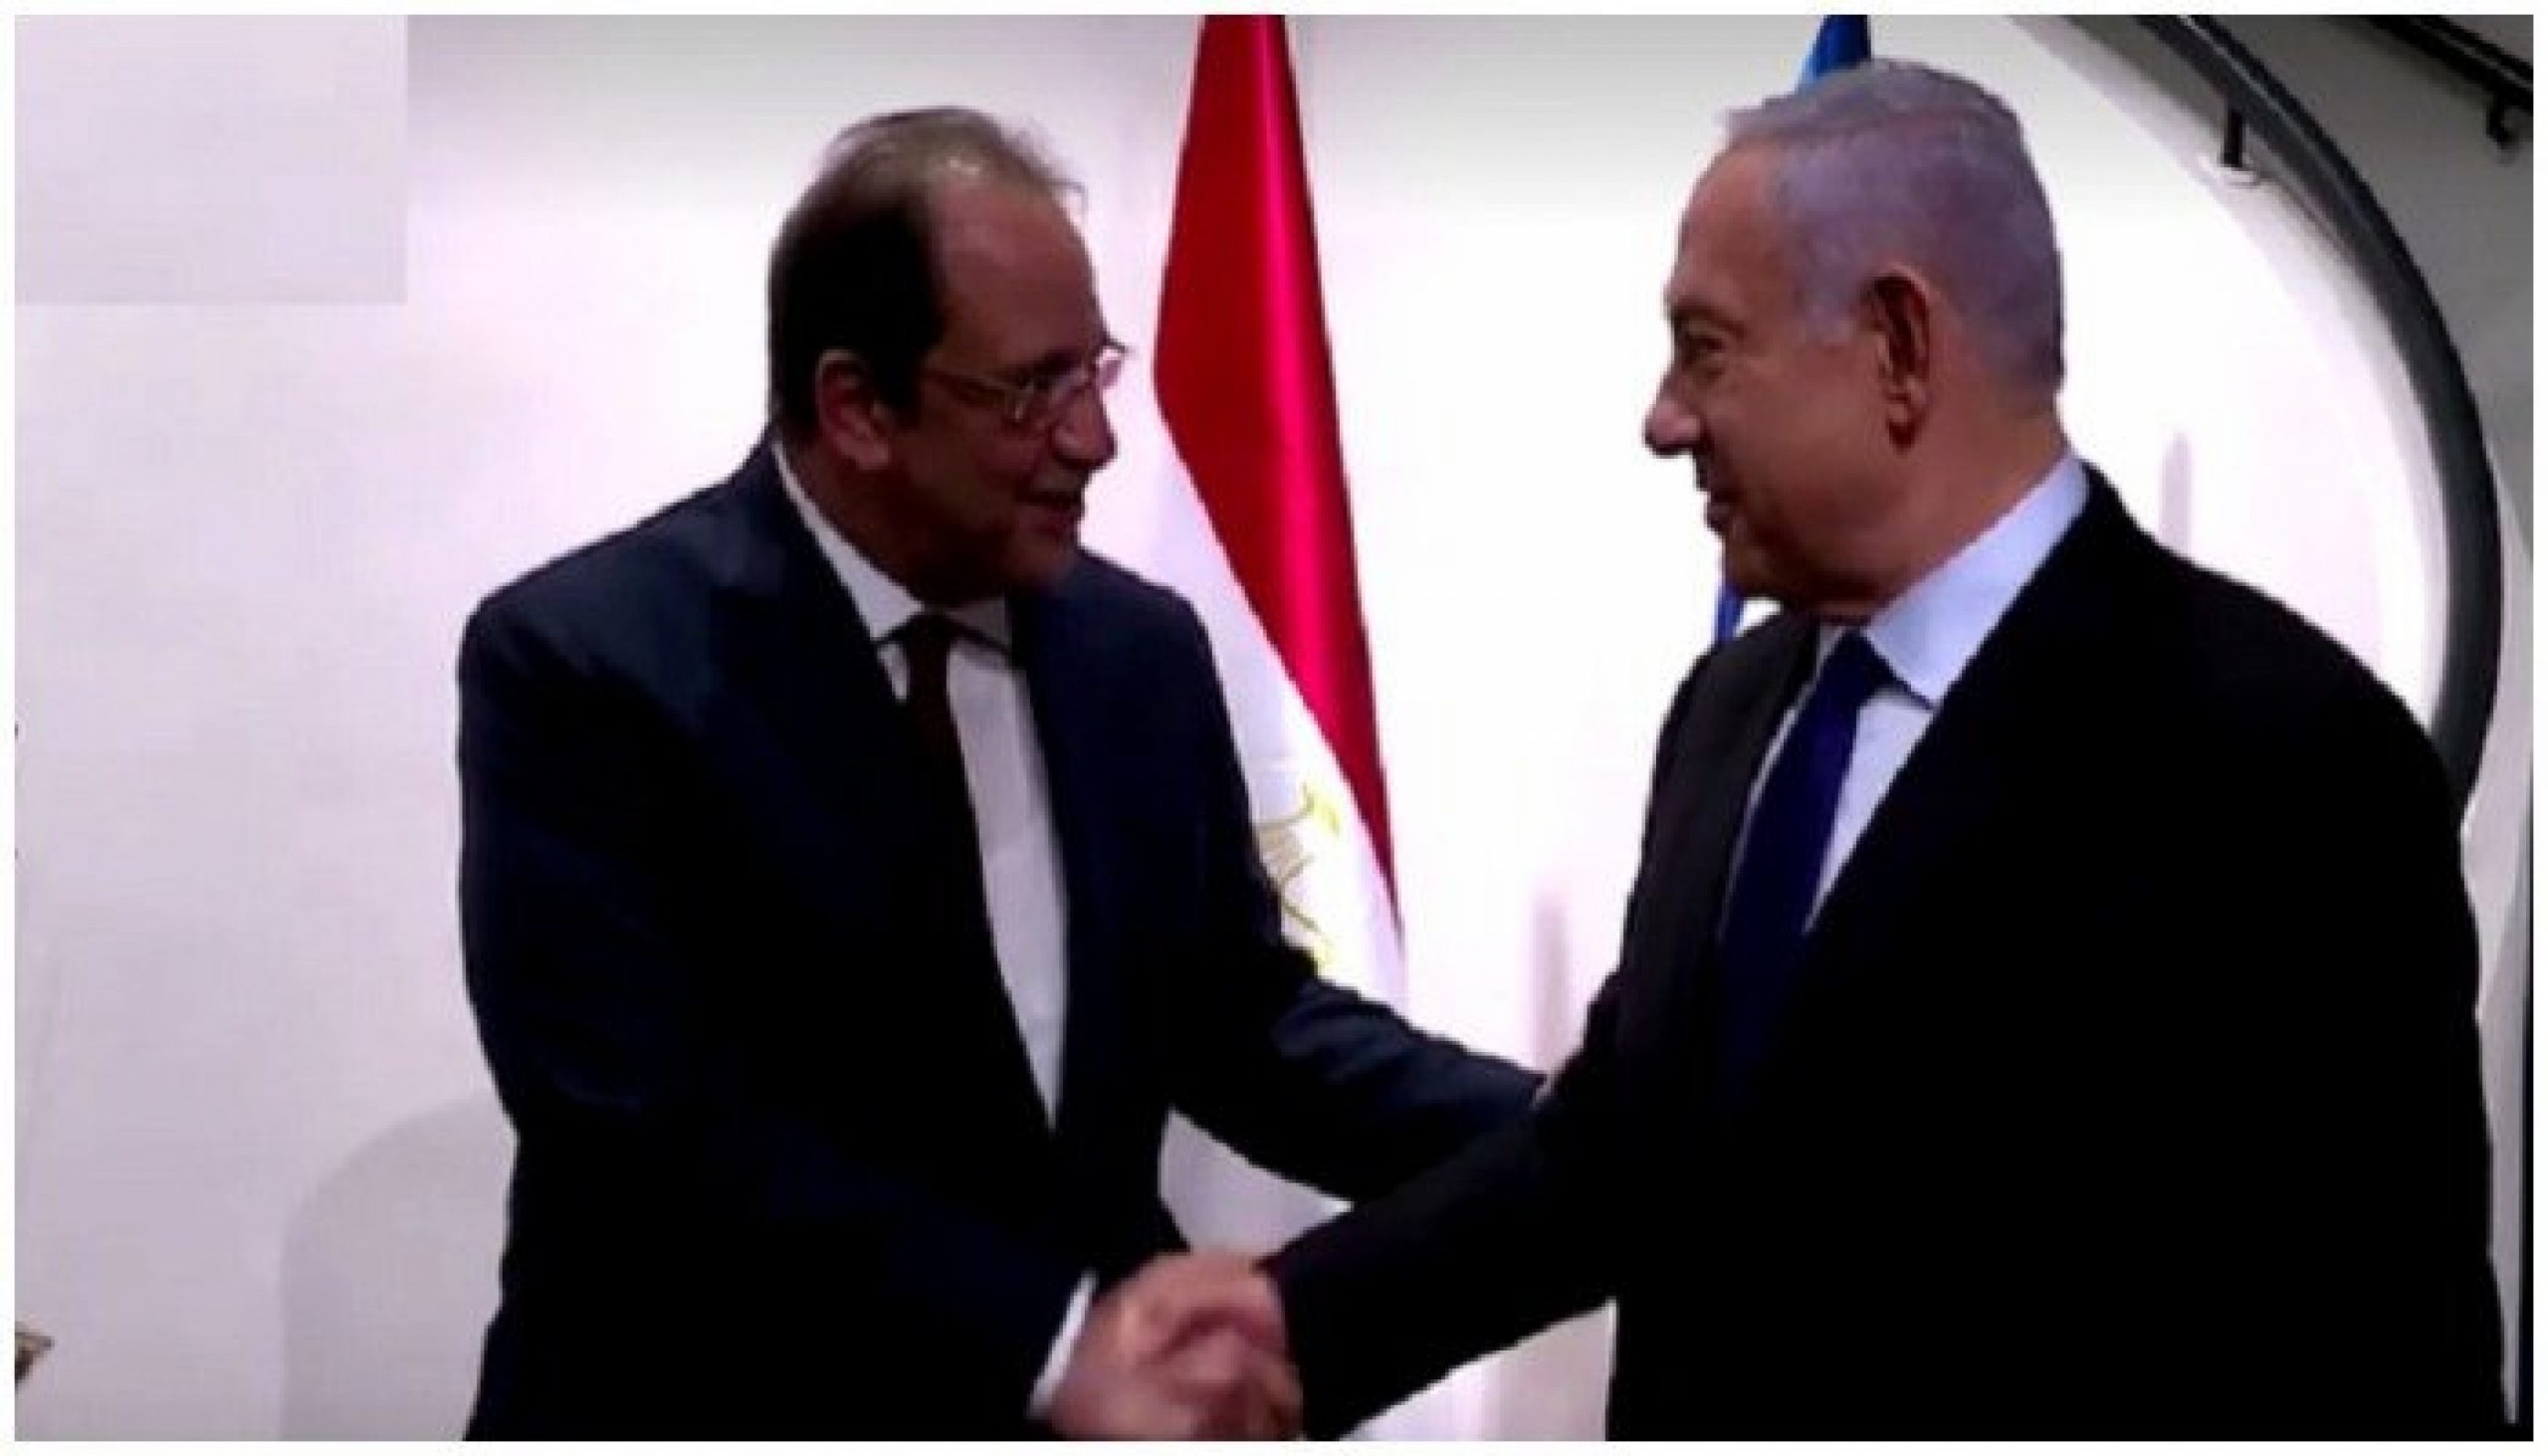 Israeli, Egyptian officials meet in effort to talk about Gaza ceasefire